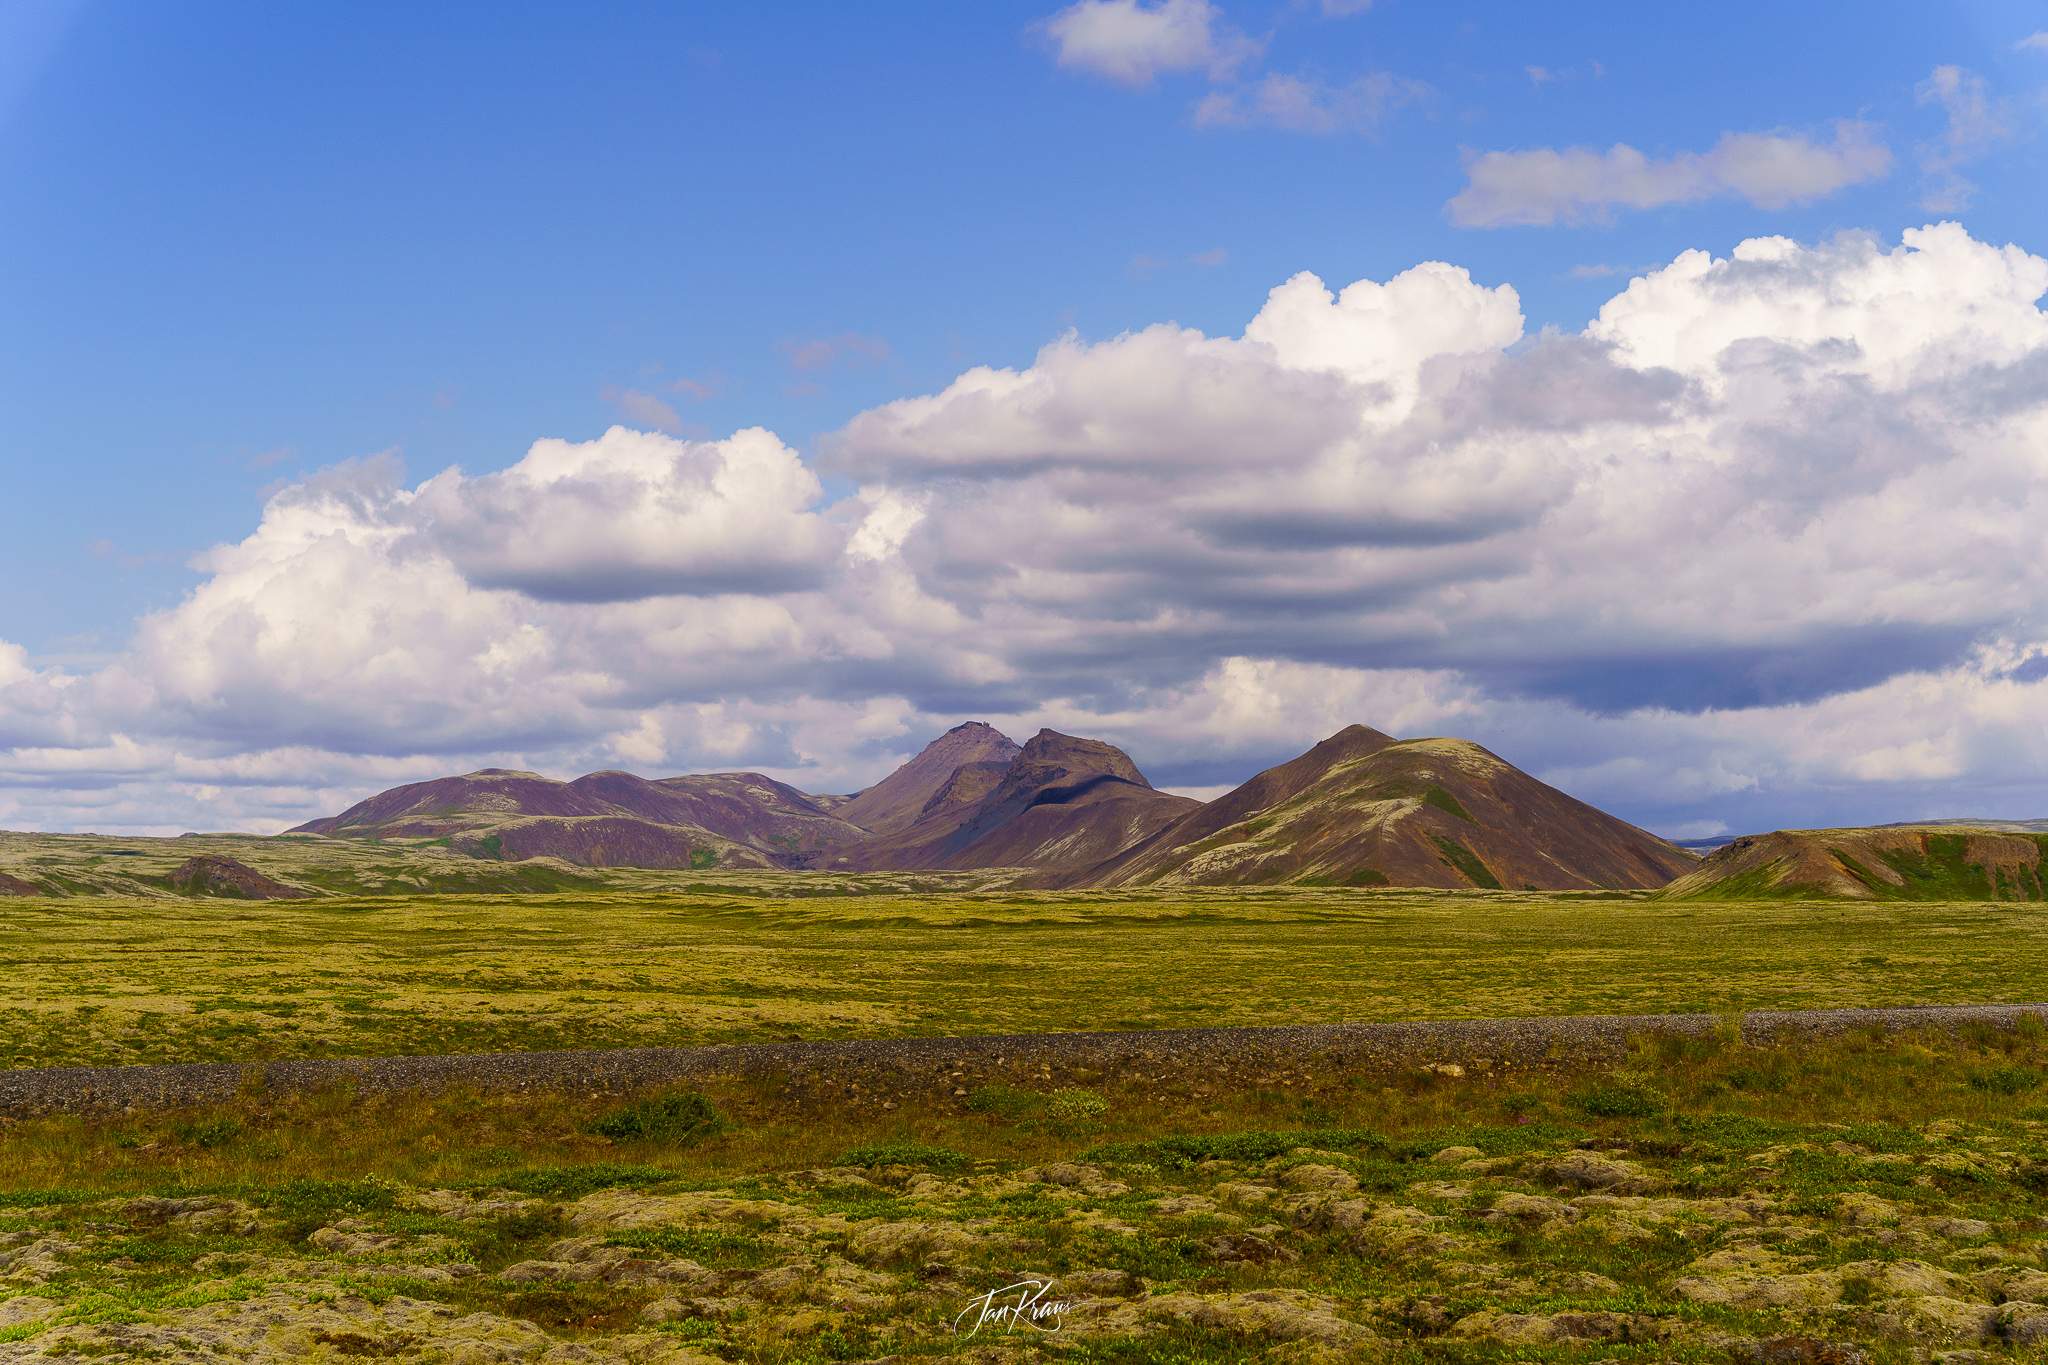 Some hills seen along the roads Roads 36 and 365, east of Thingvellir National Park, Iceland